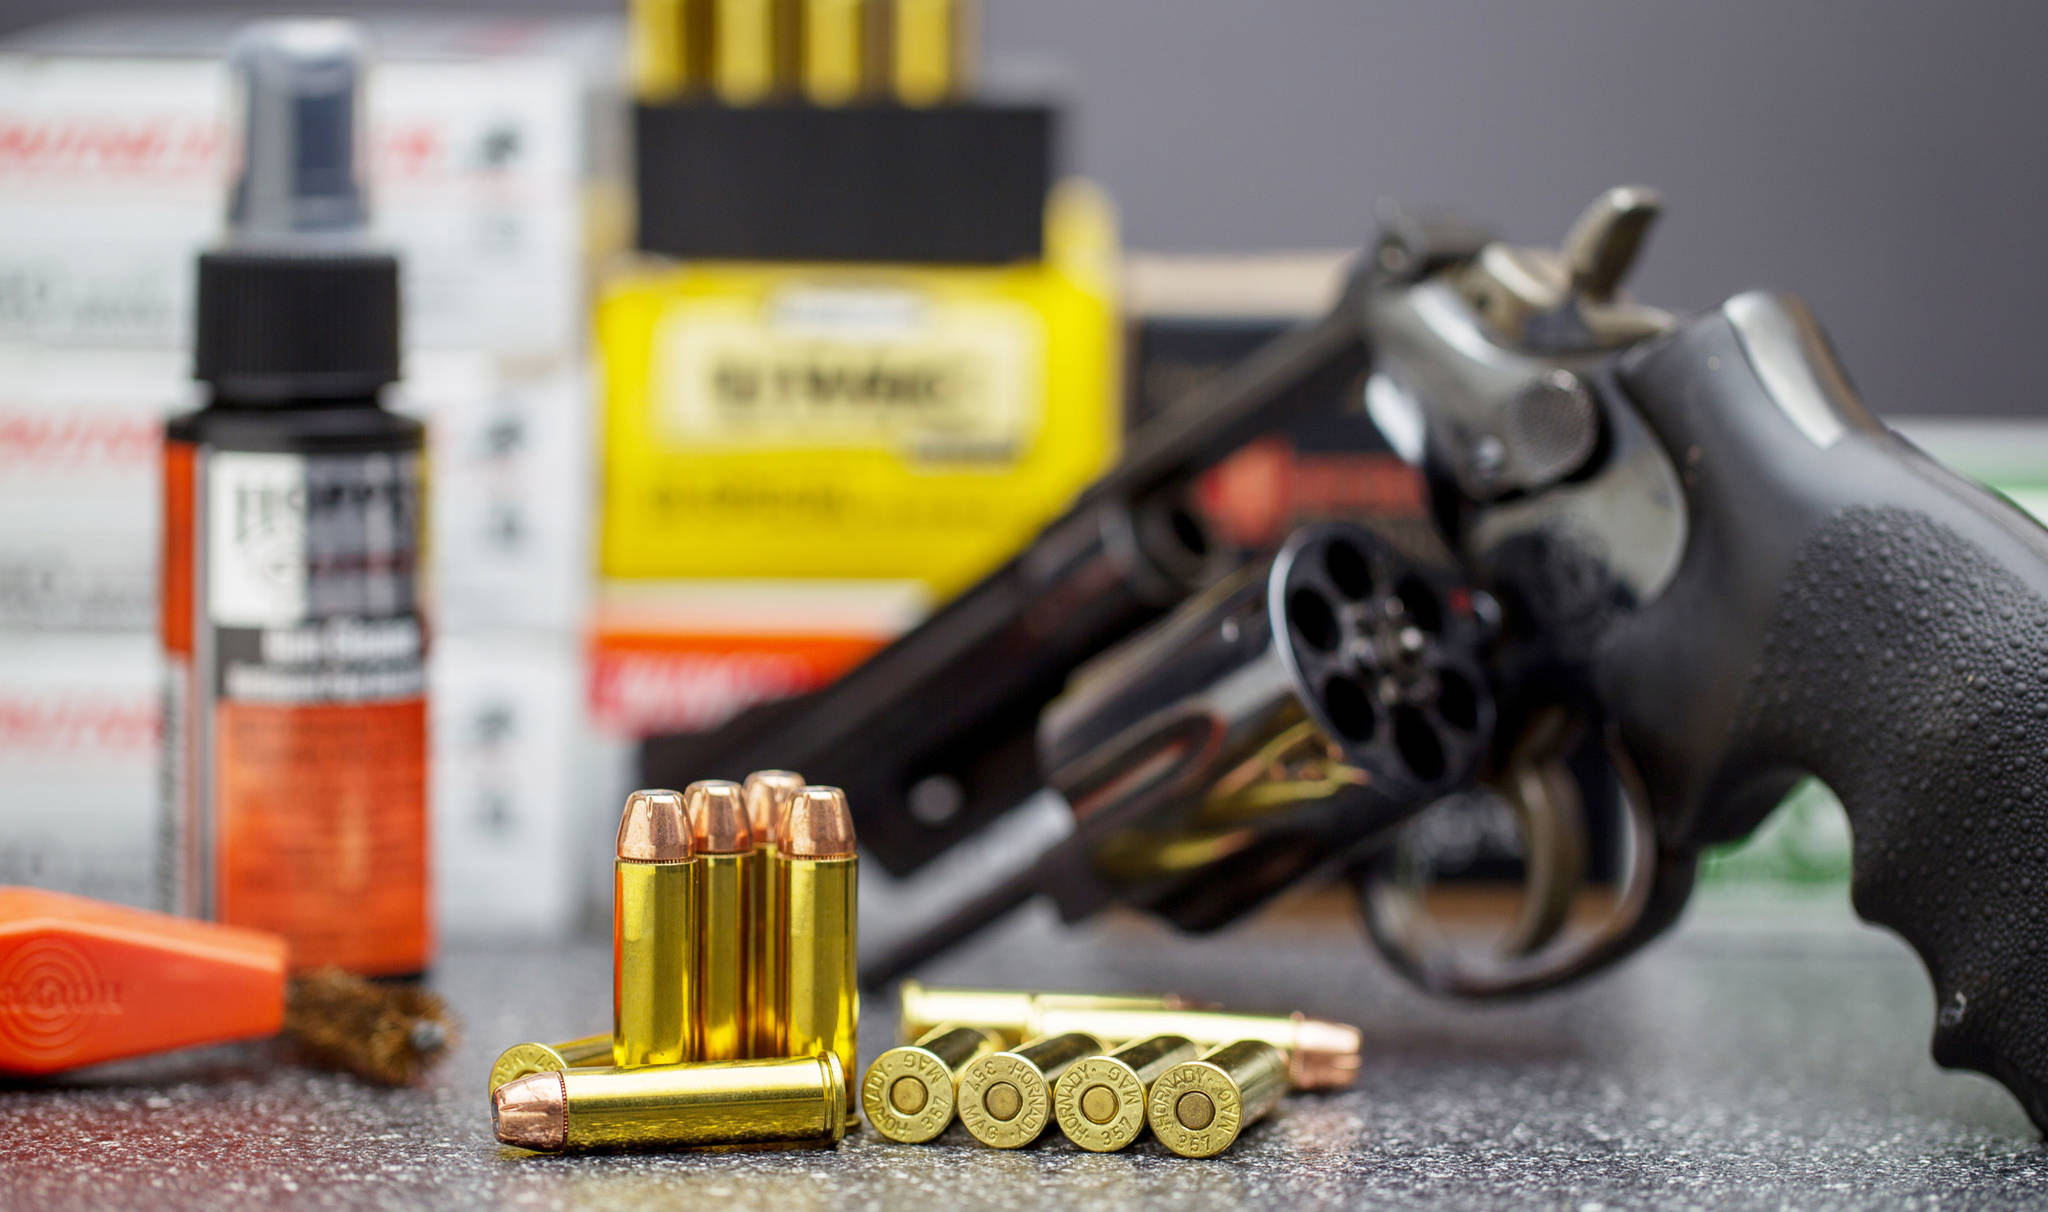 A stock image of a gun care kit. This is not the gun involved in this past Friday’s incident. (Metro Creative Connection Stock Image)